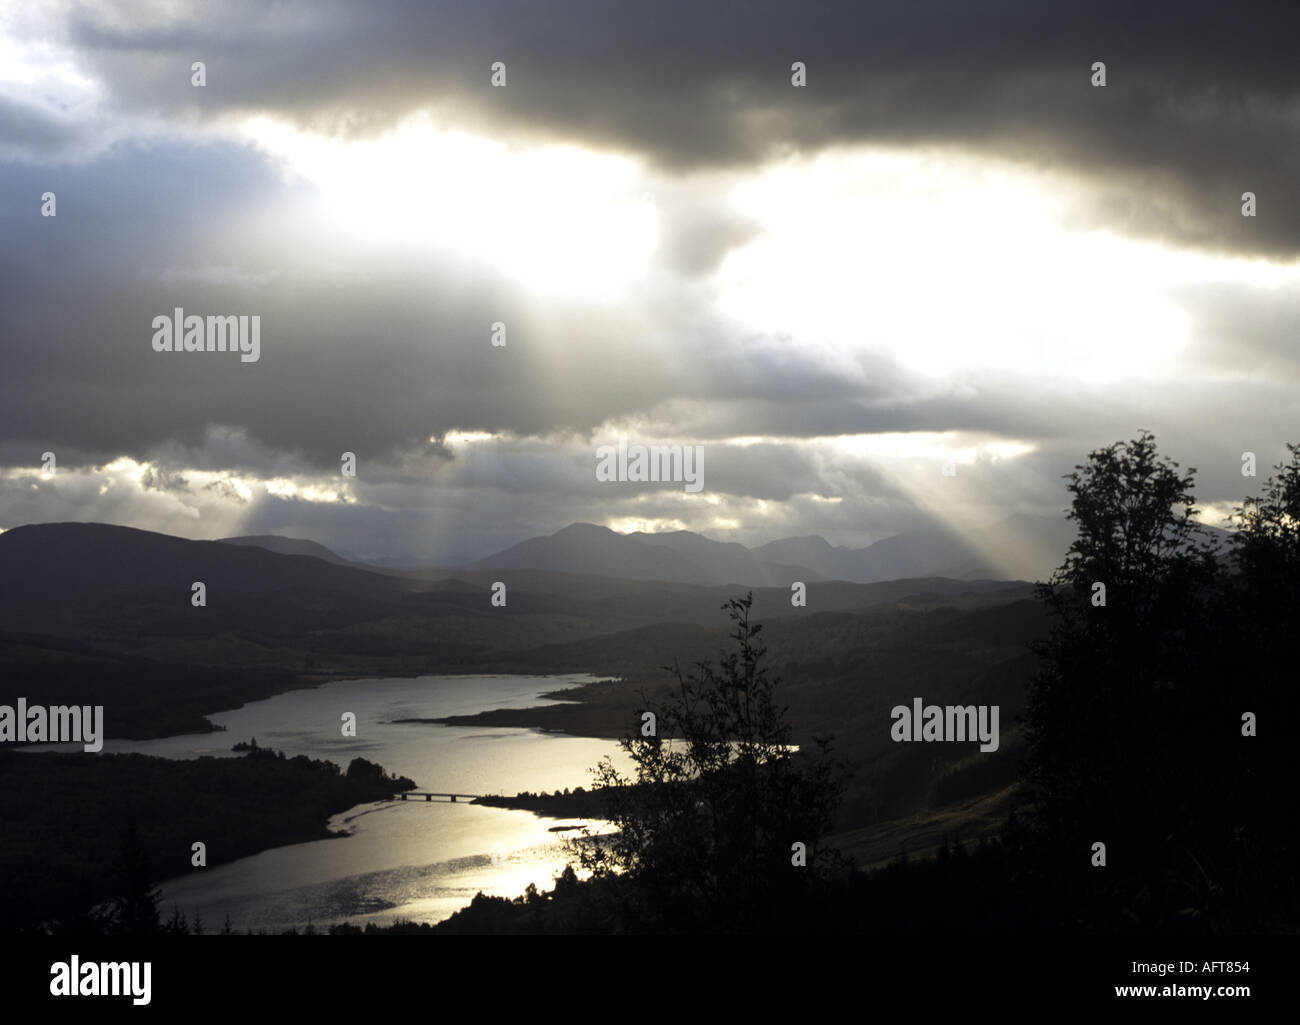 GLENGARRY SCOTTISH HIGHLANDS UK October sun rays peep through the heavy cloud on Loch Garry as seen from the Glengarry viewpoint Stock Photo